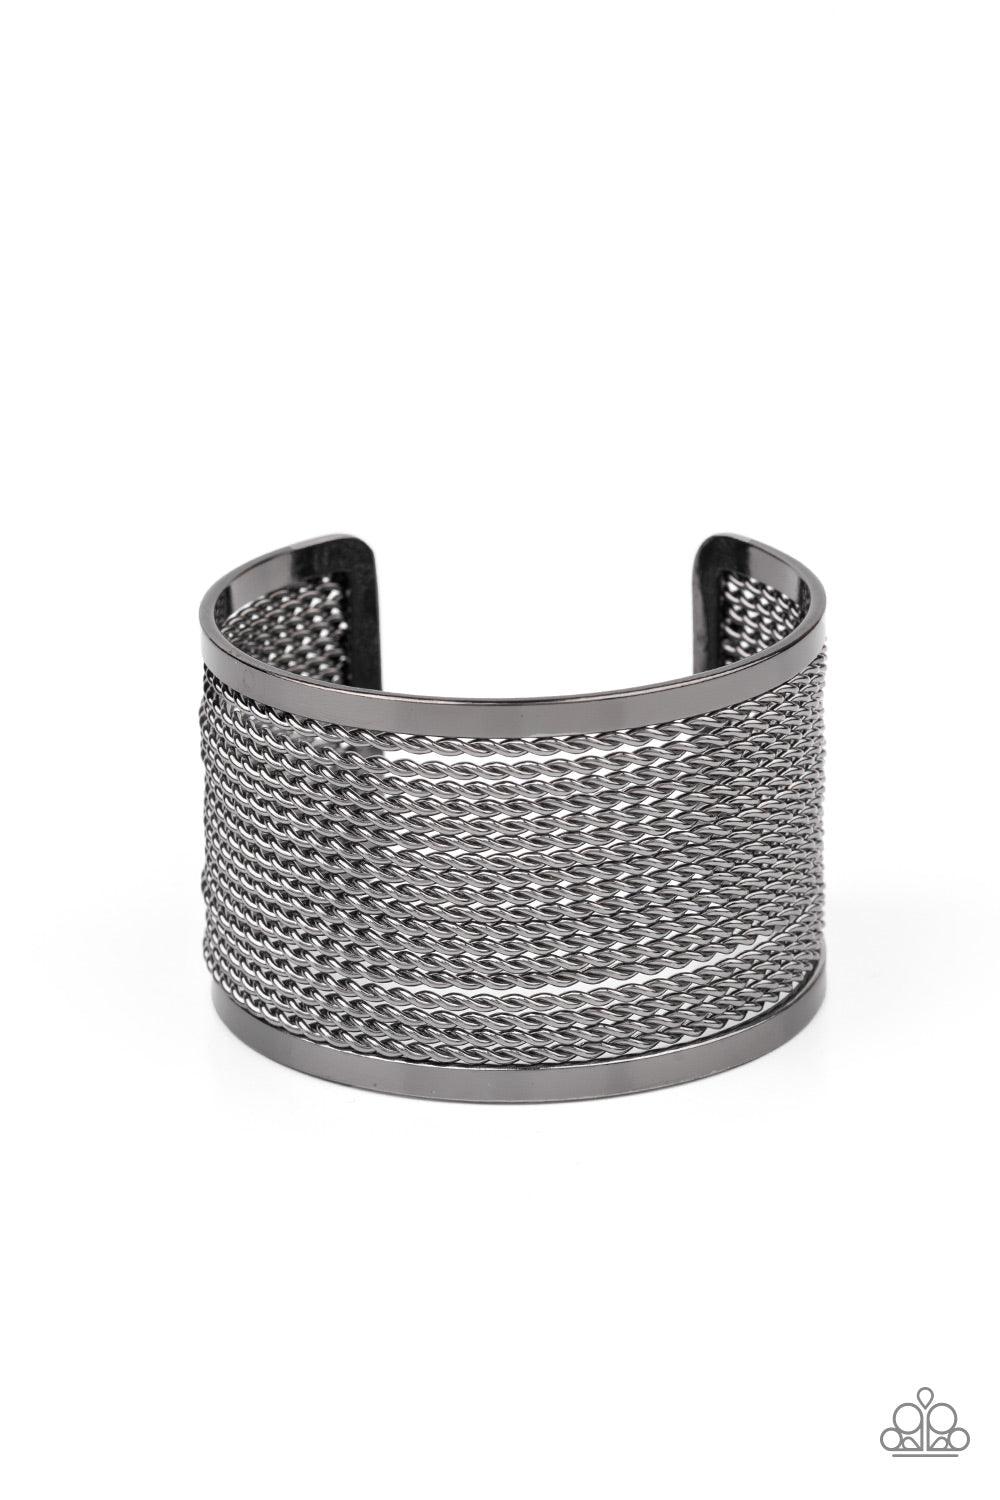 Paparazzi Accessories Stacked Sensation - Black Twisted rows of gunmetal wire layer between two flat gunmetal bars, coalescing into a boldly stacked cuff around the wrist. Sold as one individual bracelet. Jewelry